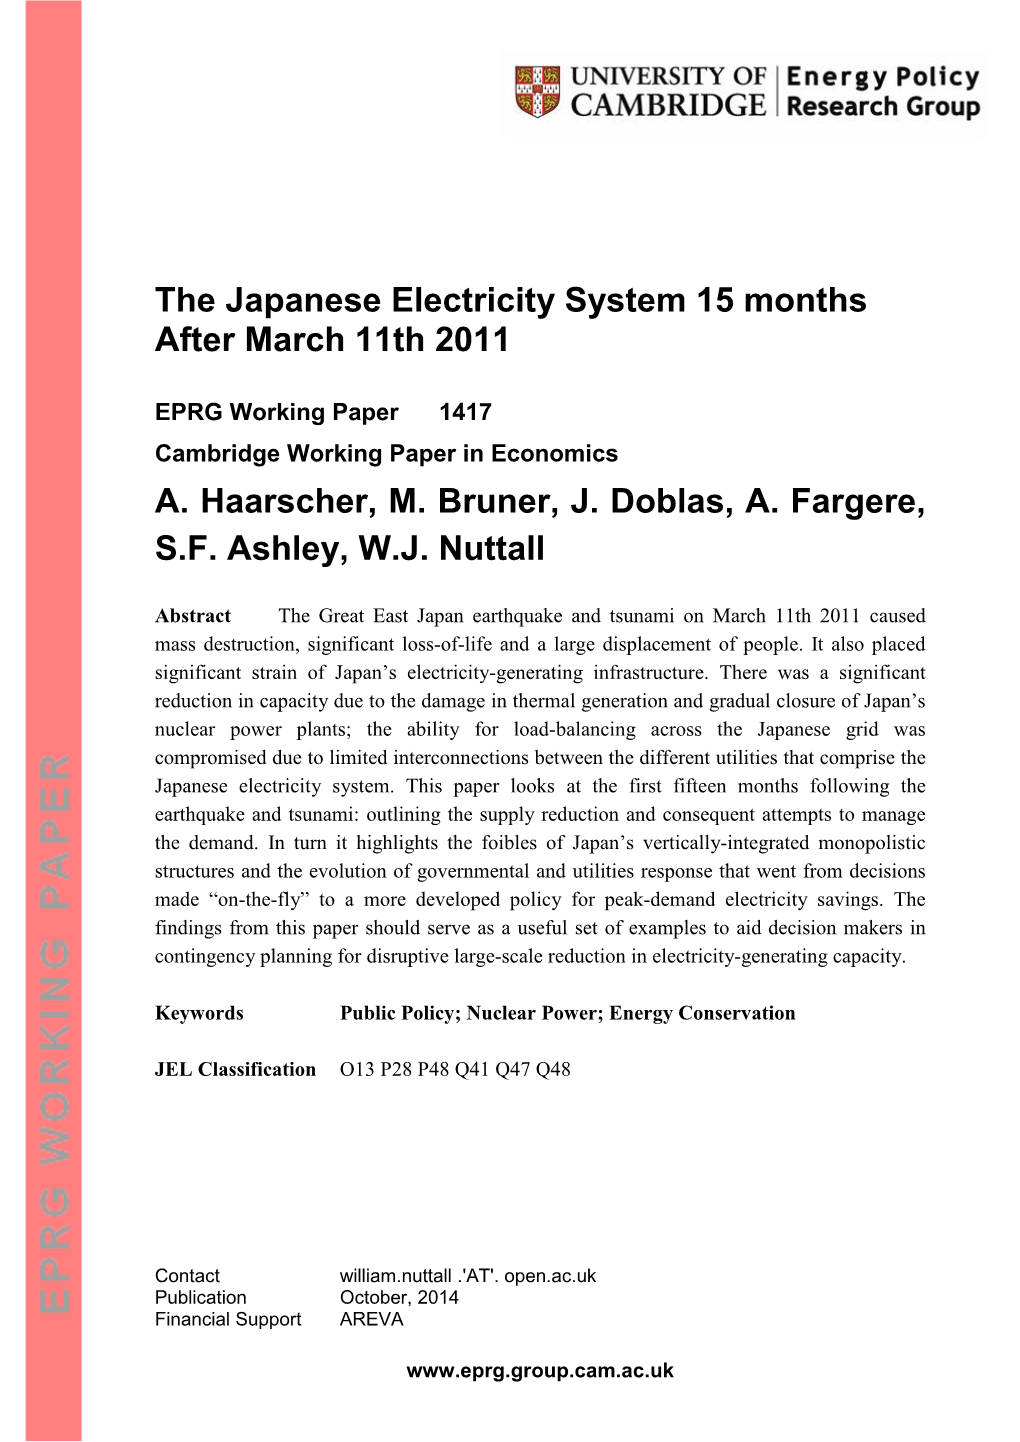 The Japanese Electricity System 15 Months After March 11Th 2011 A